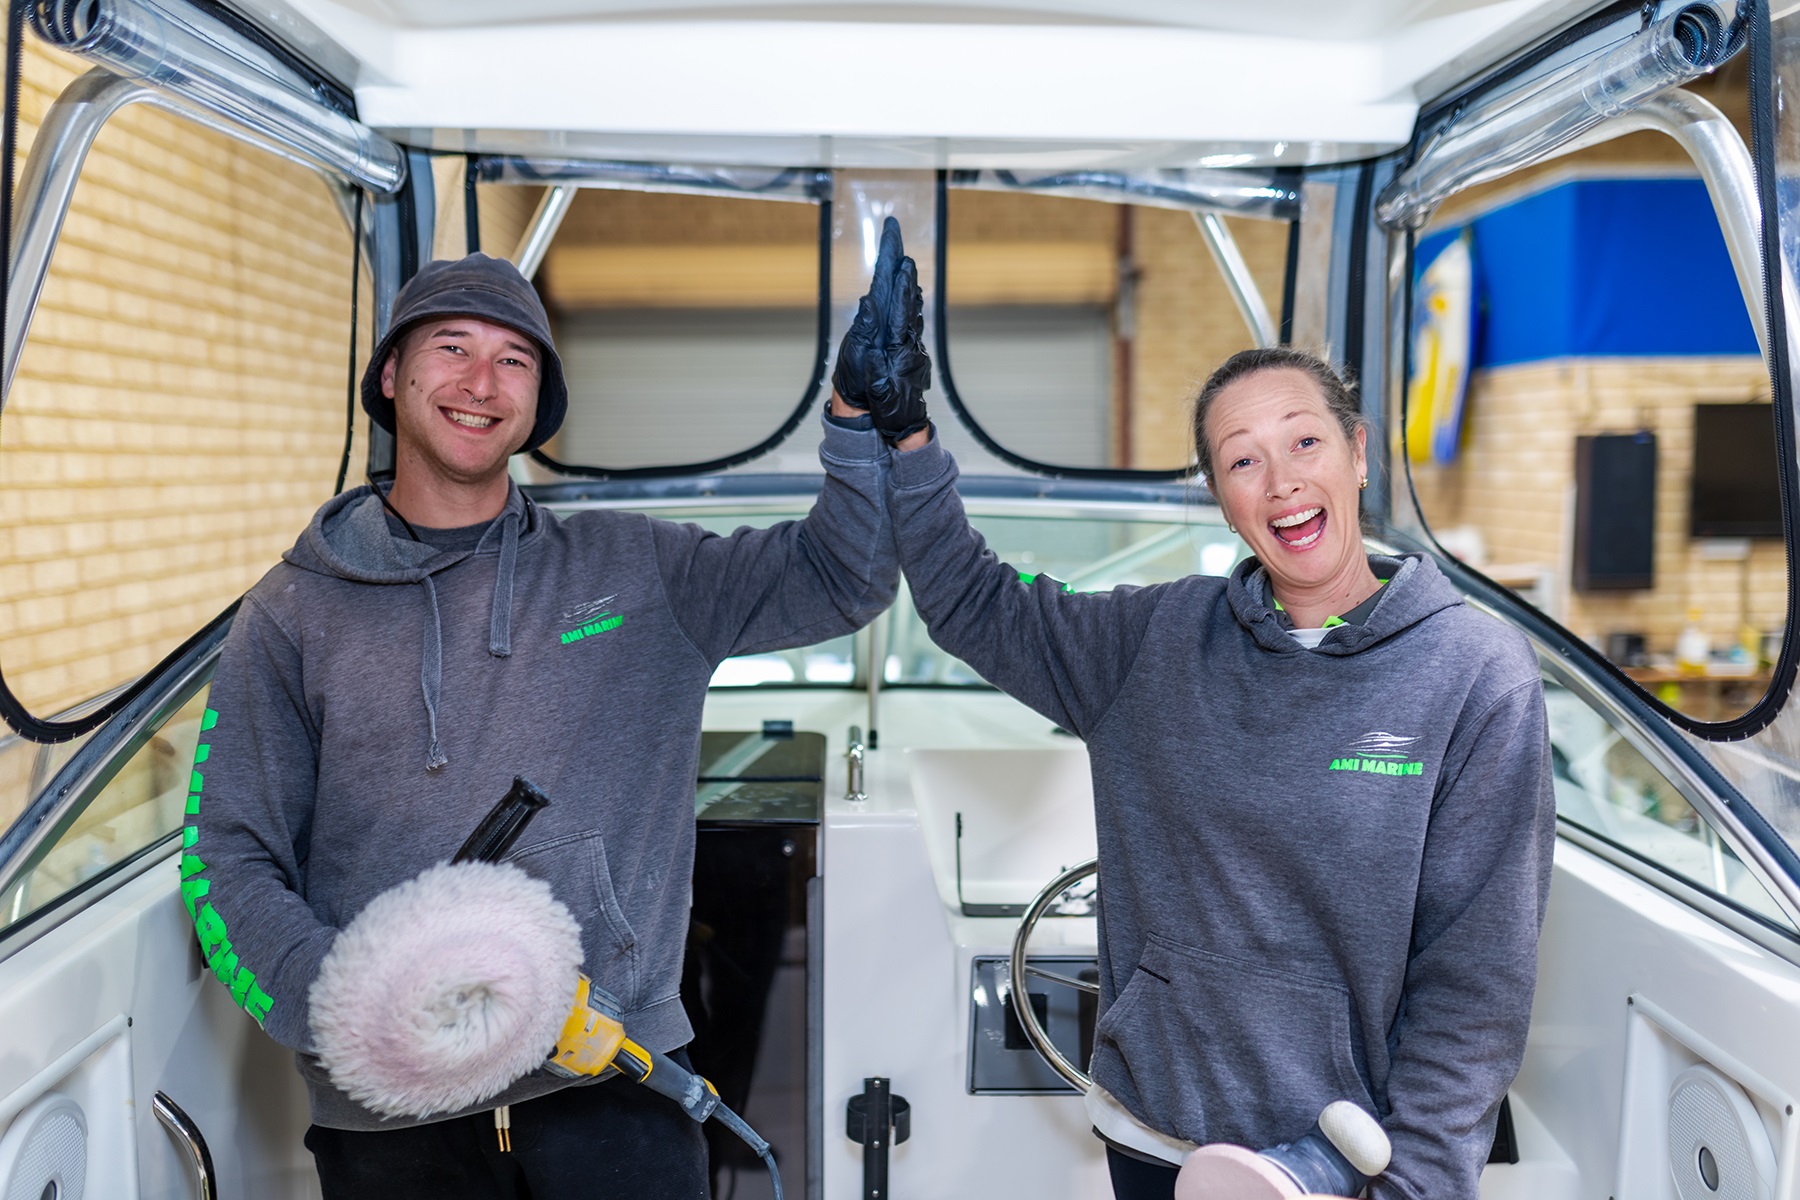 Photo of Ami Hacket, owner of Ami Marine, with her brother Angus who works in the business with her. They are high fiving on a boat.